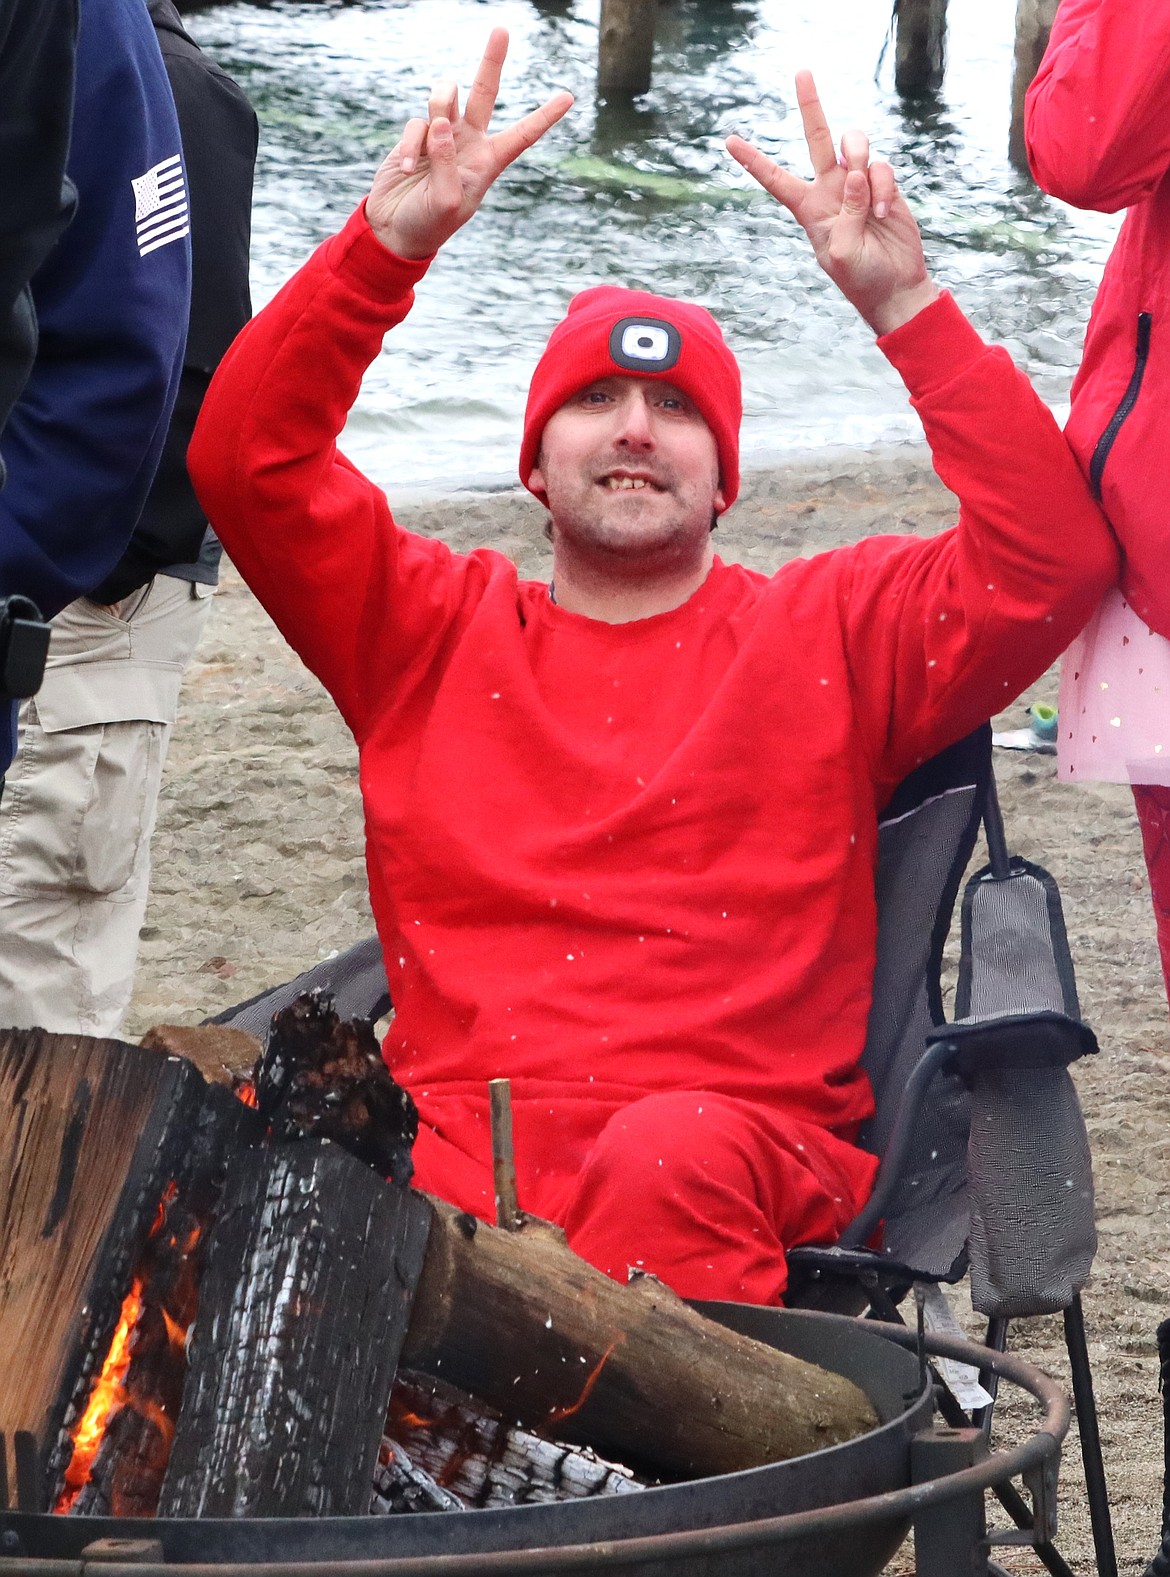 Dustin Johnson warms up by the fire after the Valentine's Polar Plunge into Lake Coeur d'Alene on Thursday.